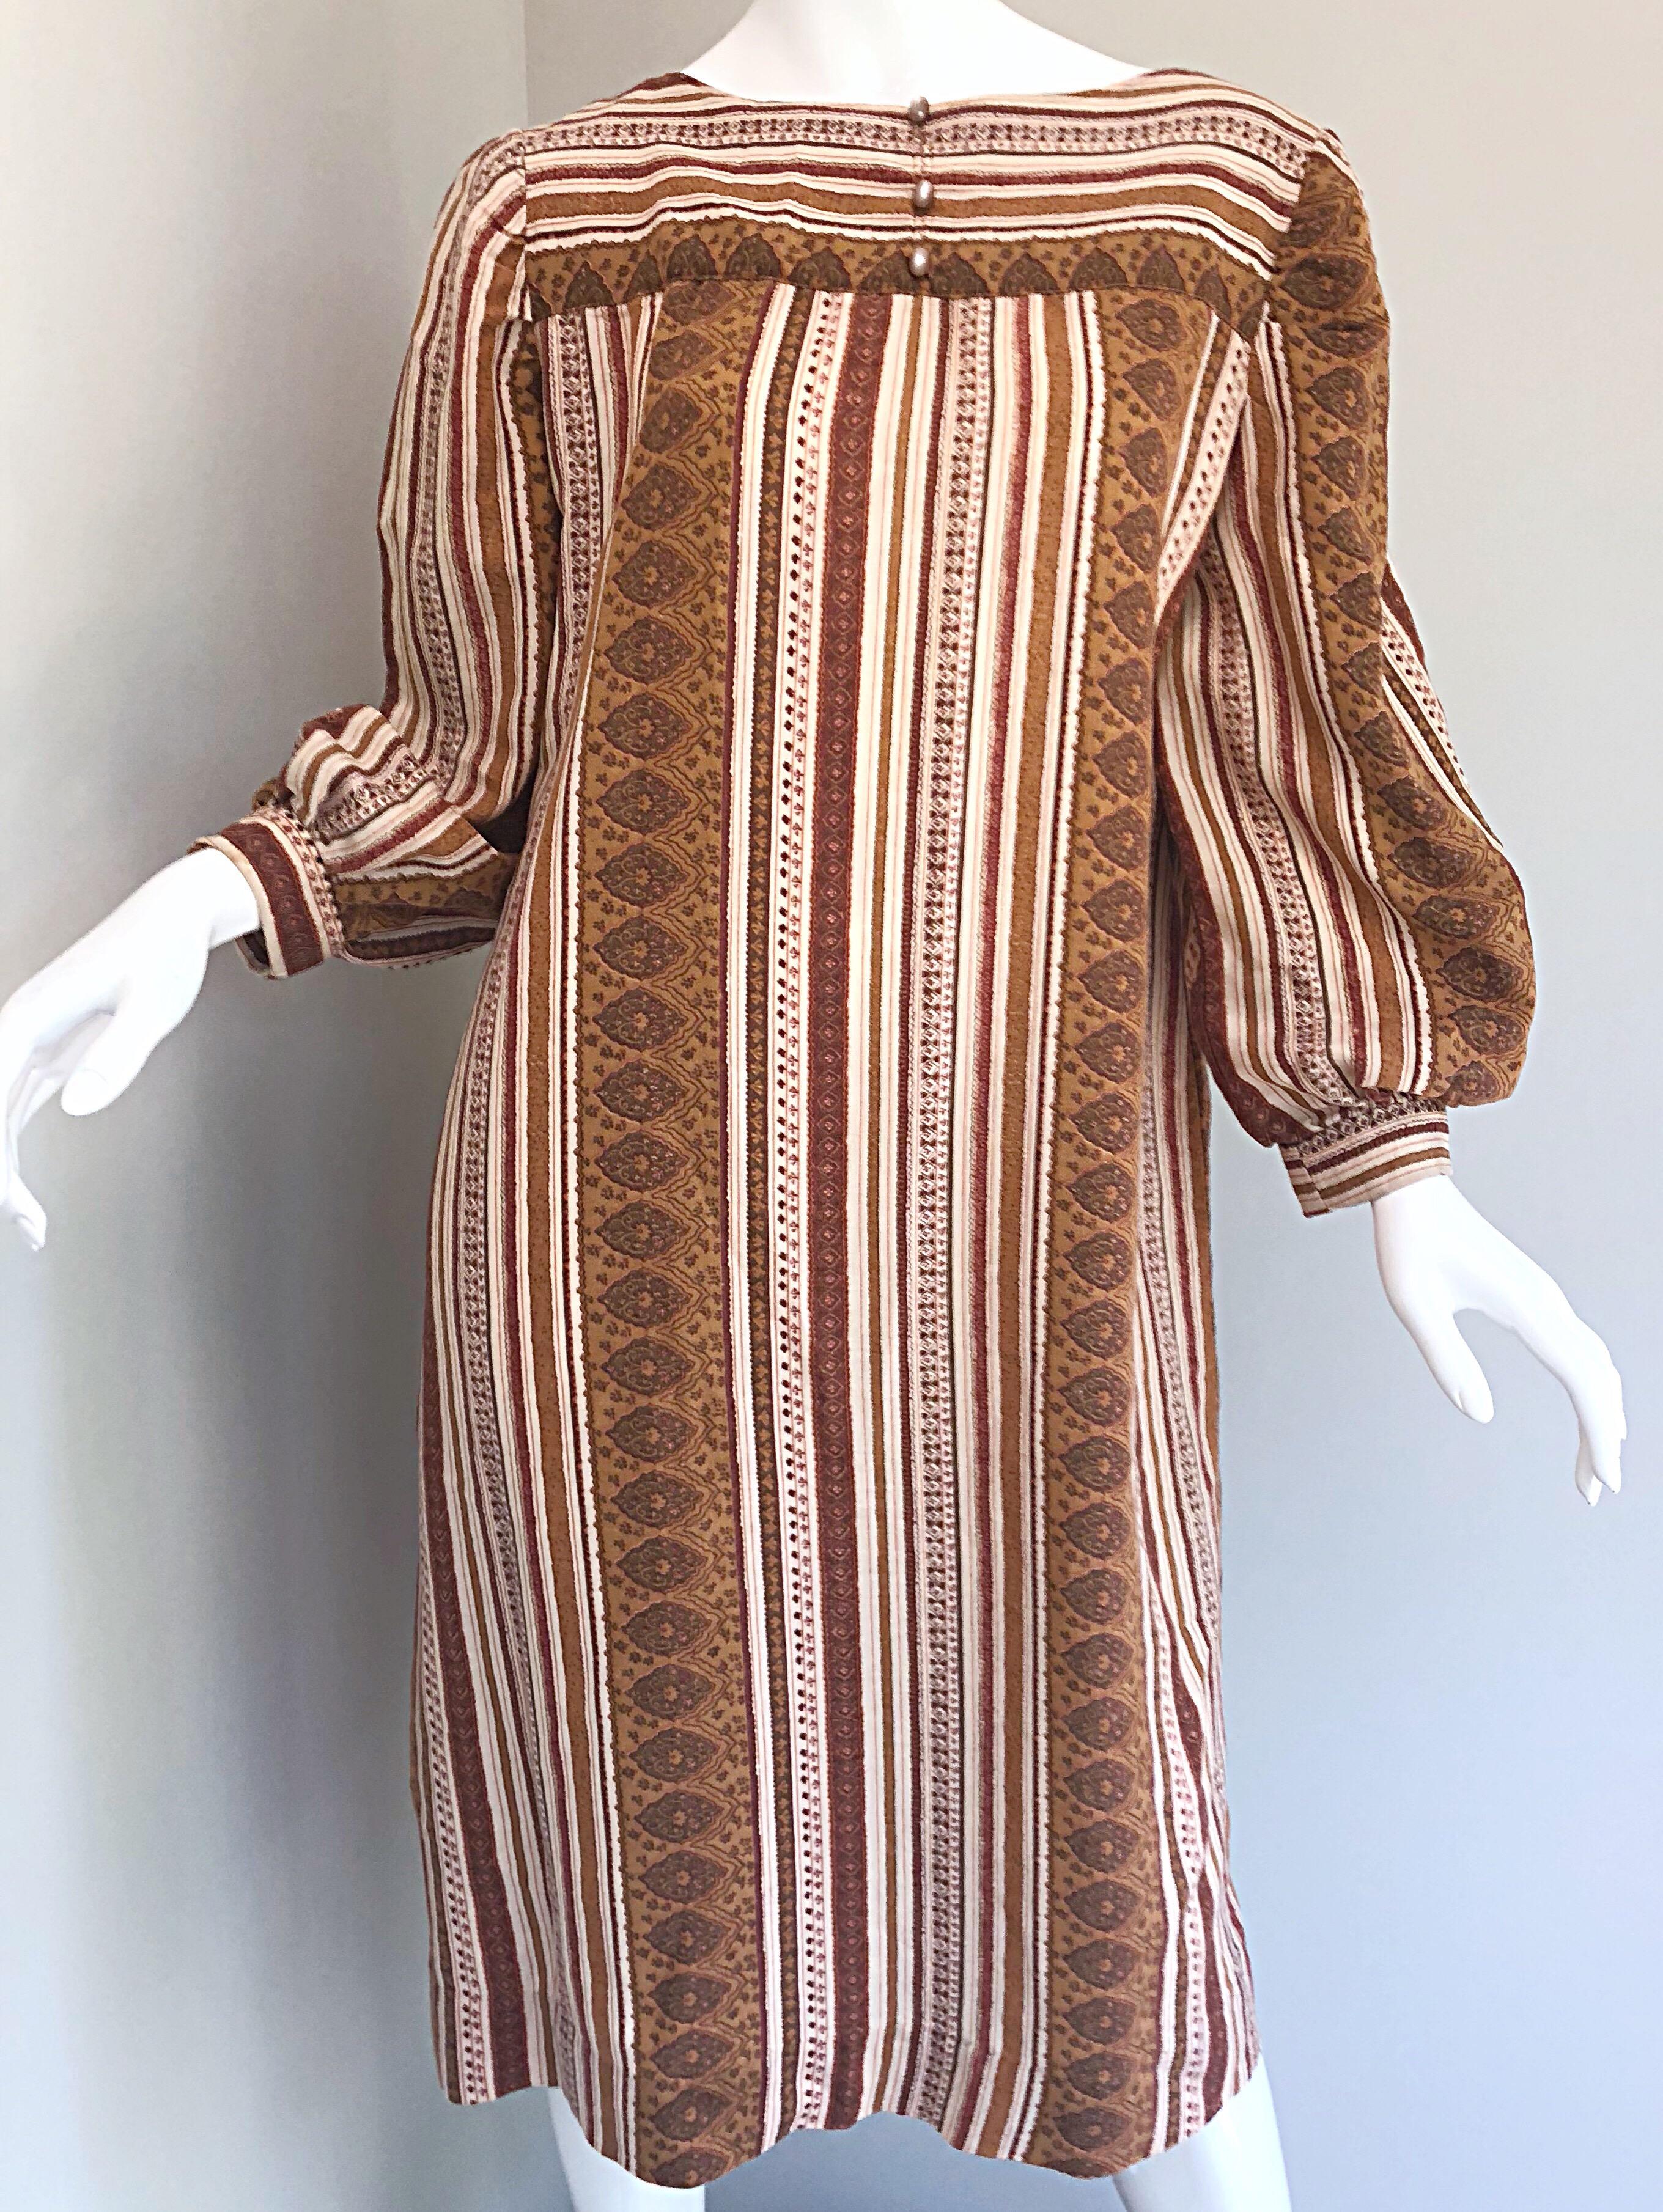 1970s Boho Chic Brown and Ivory Soft Cotton Paisley Print Vintage 70s Dress 8